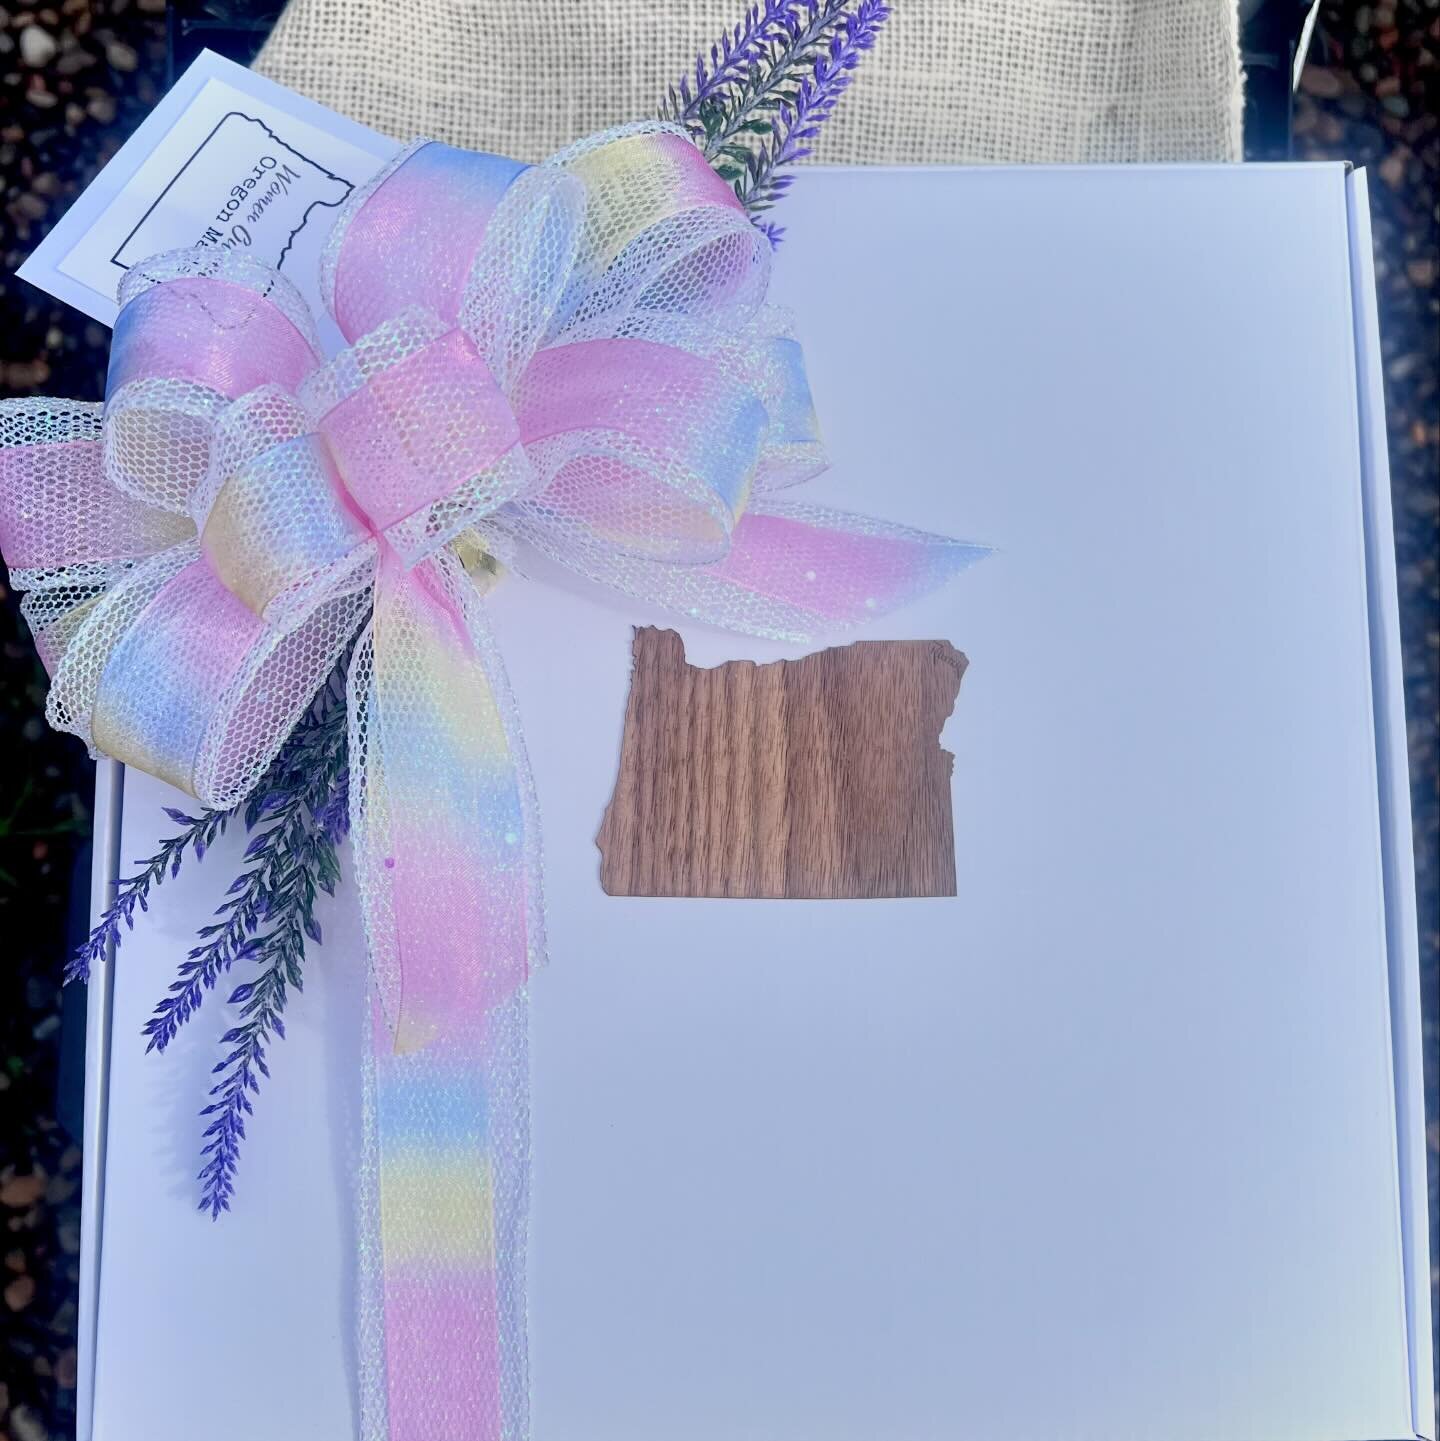 2 tier custom designed gift box request made for a ✨ magical unicorn 🦄. Featuring Oregon small family and women owned business self care products and foods.